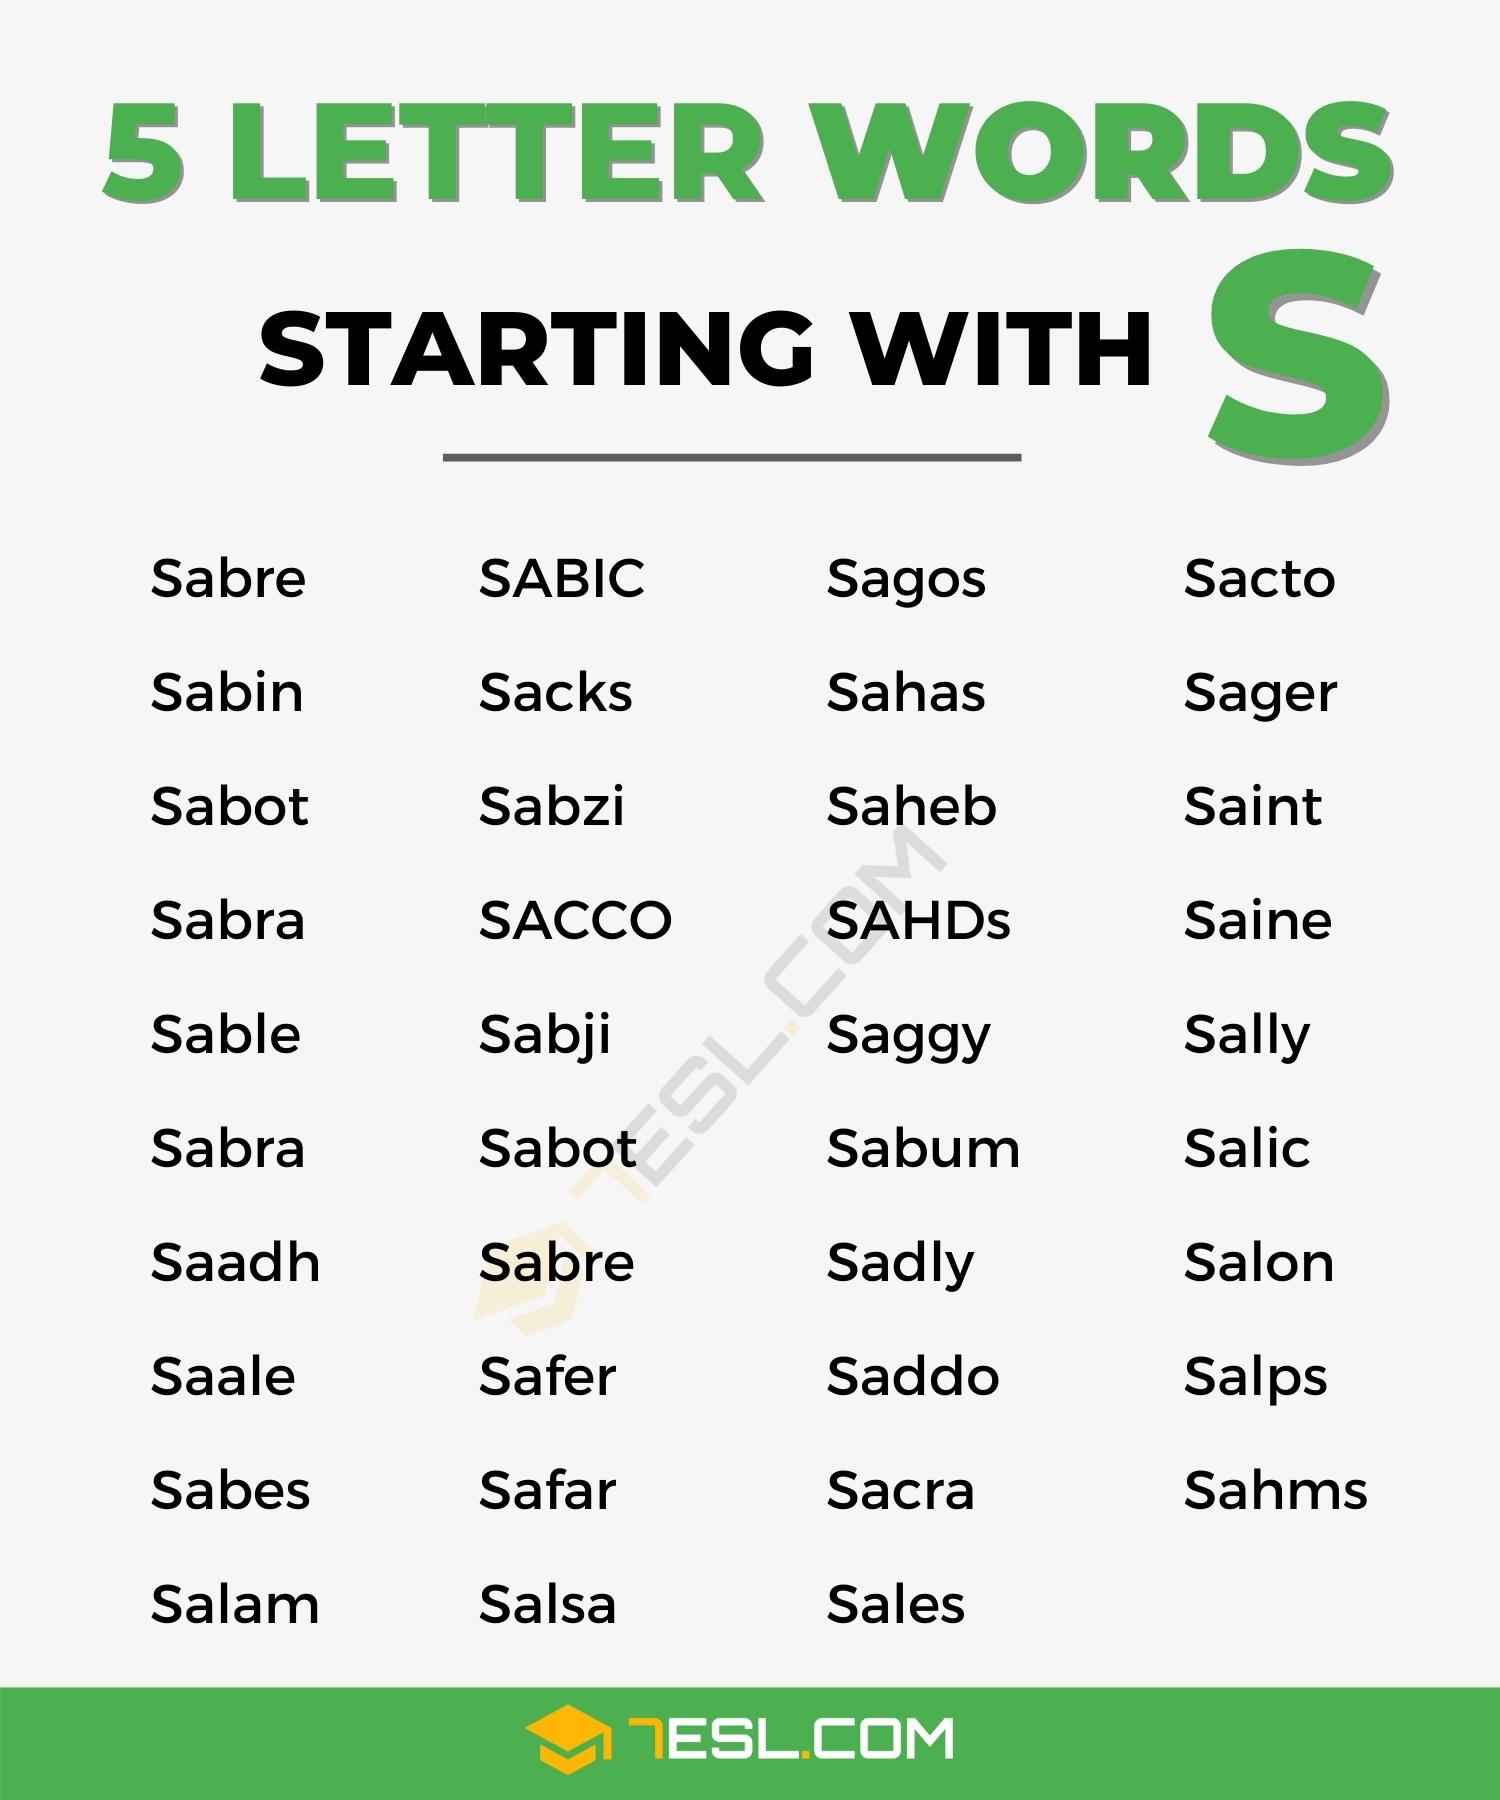 5-Letter Words That Start With S